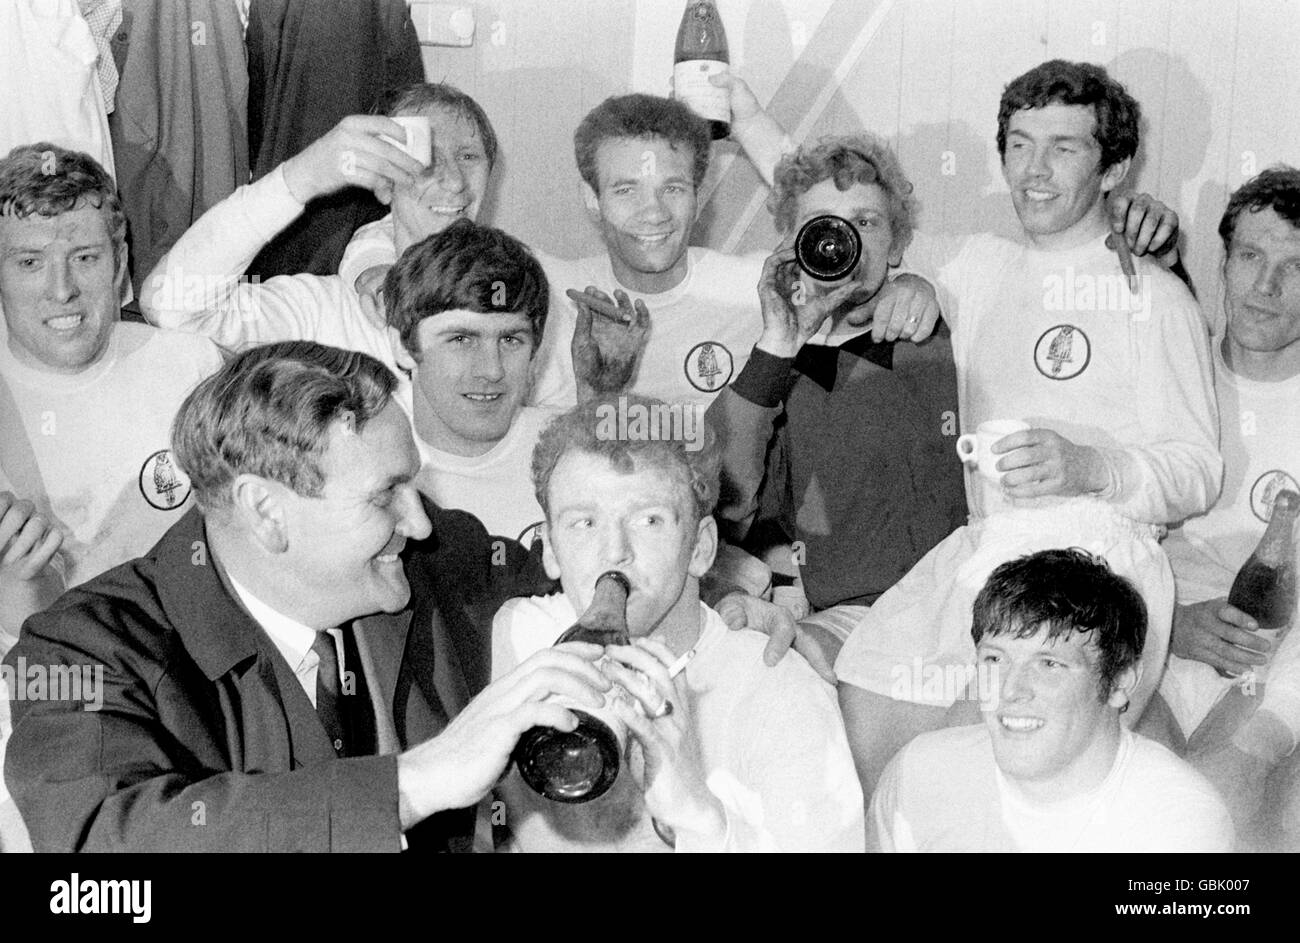 Leeds United players celebrate with champagne and cigars in the dressing room after drawing 0-0 with Liverpool, a result which wrapped up Leeds' first Division One Championship title: (back row, l-r) Mick Jones, Jack Charlton, Paul Reaney, Gary Sprake, Johnny Giles, Paul Madeley; (front row, l-r) manager Don Revie, Peter Lorimer, Billy Bremner, Eddie Gray Stock Photo